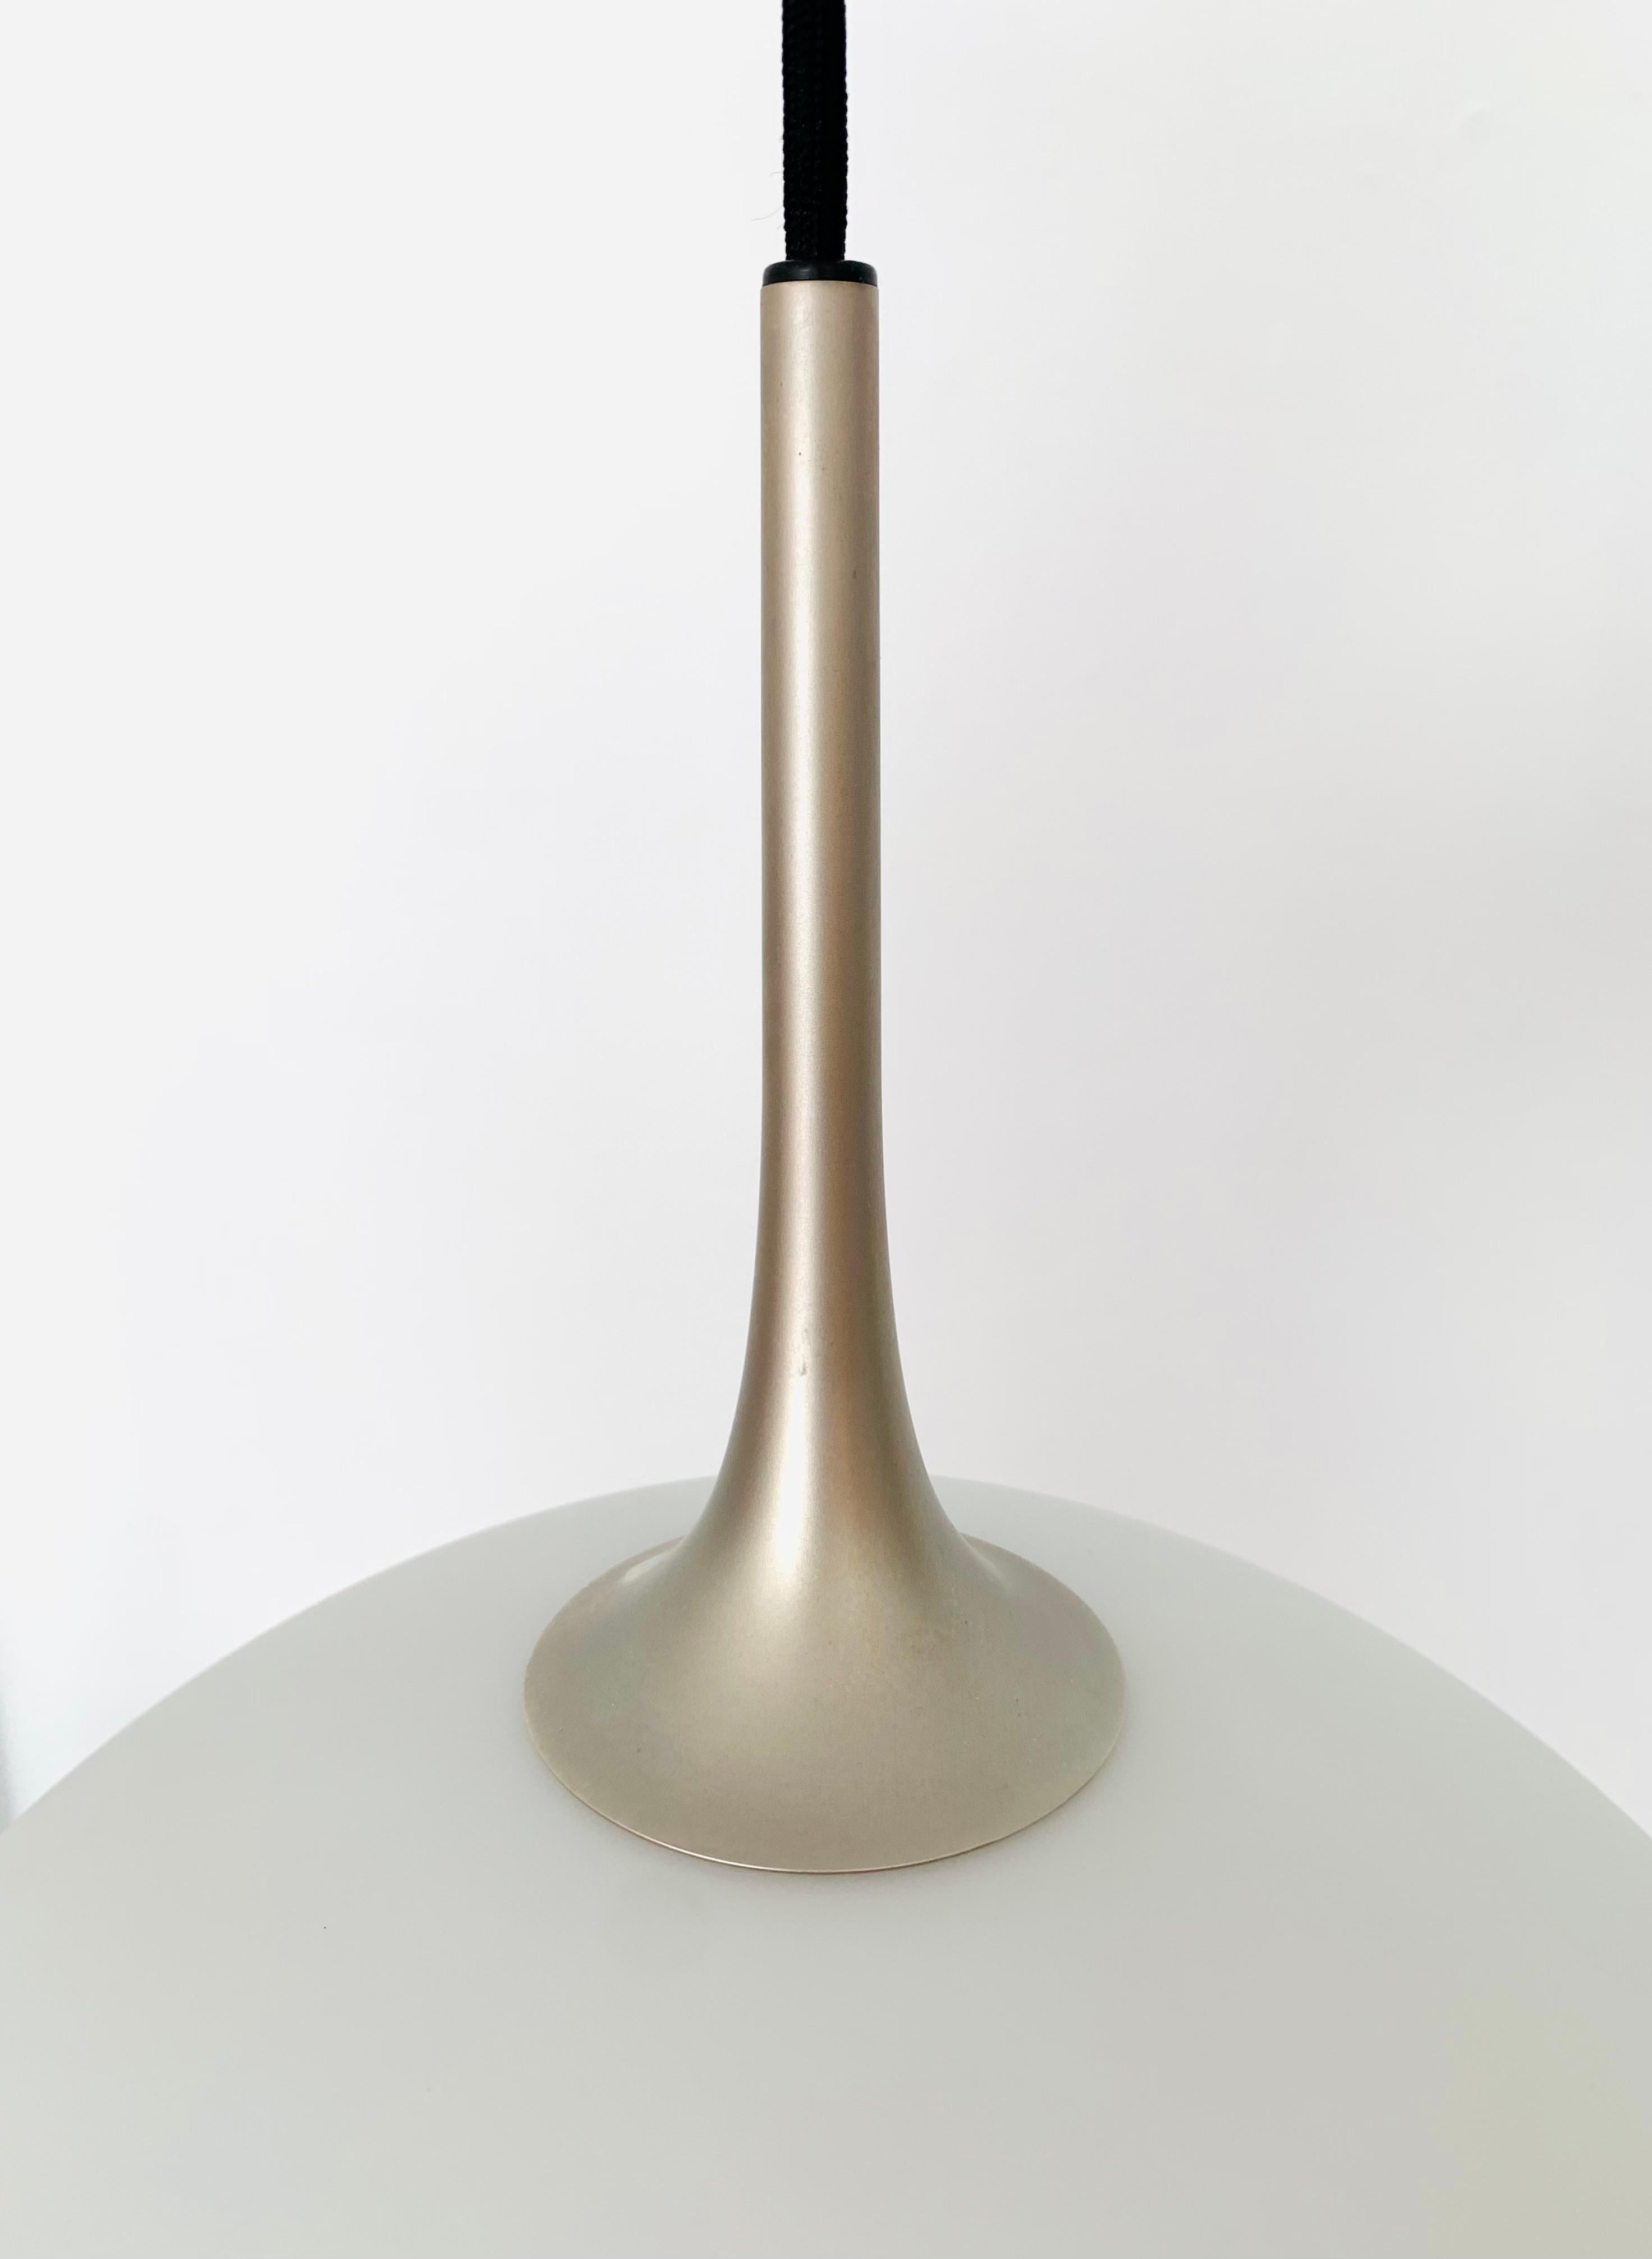 Late 20th Century Opaline Posa 36 Pendant Lamp with Counterweight by Florian Schulz For Sale